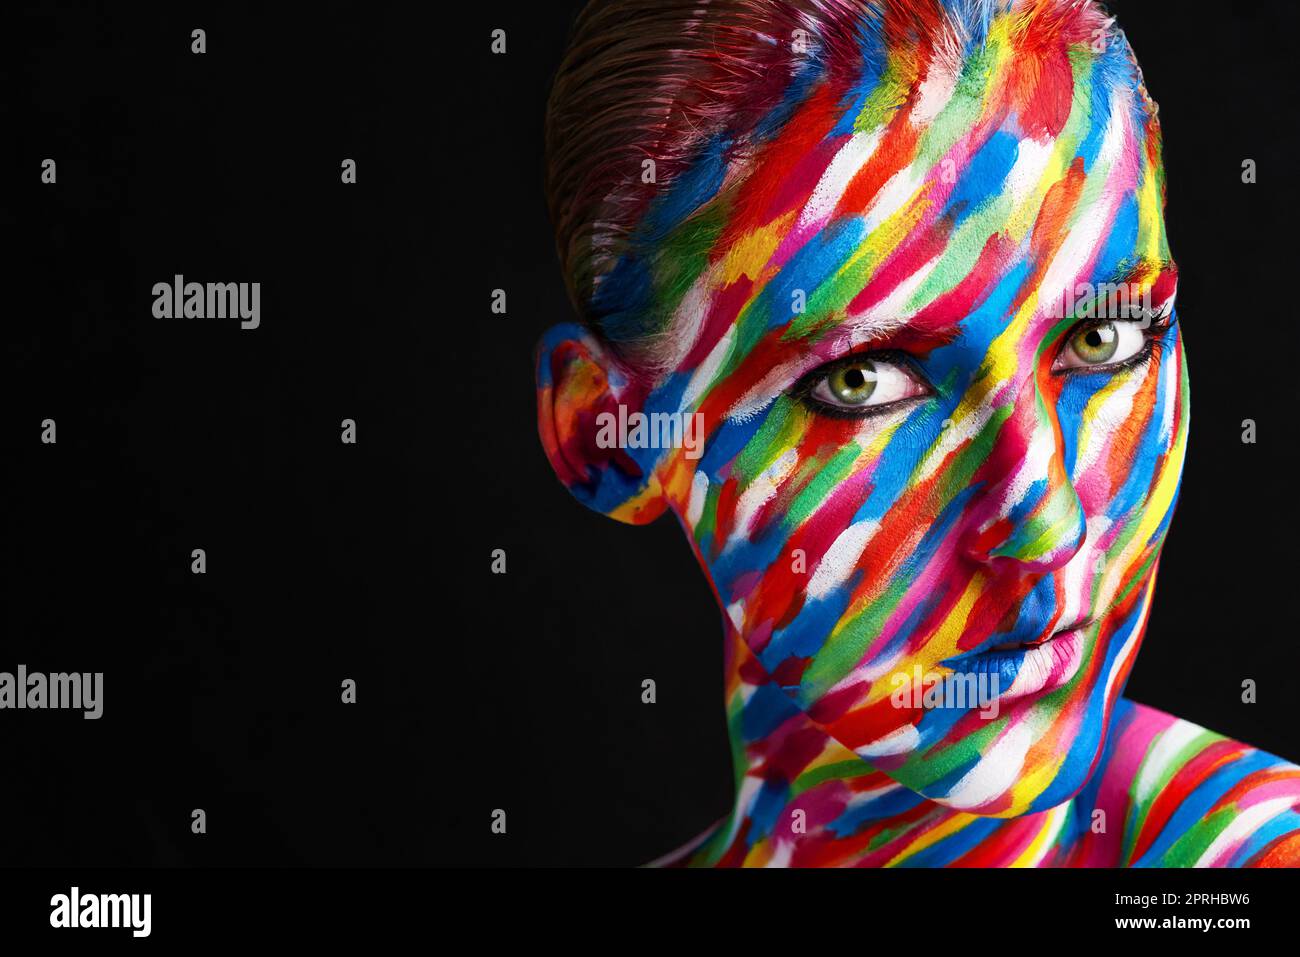 Colors speak louder than words. Studio shot of a young woman posing with brightly colored paint on her face against a black background. Stock Photo